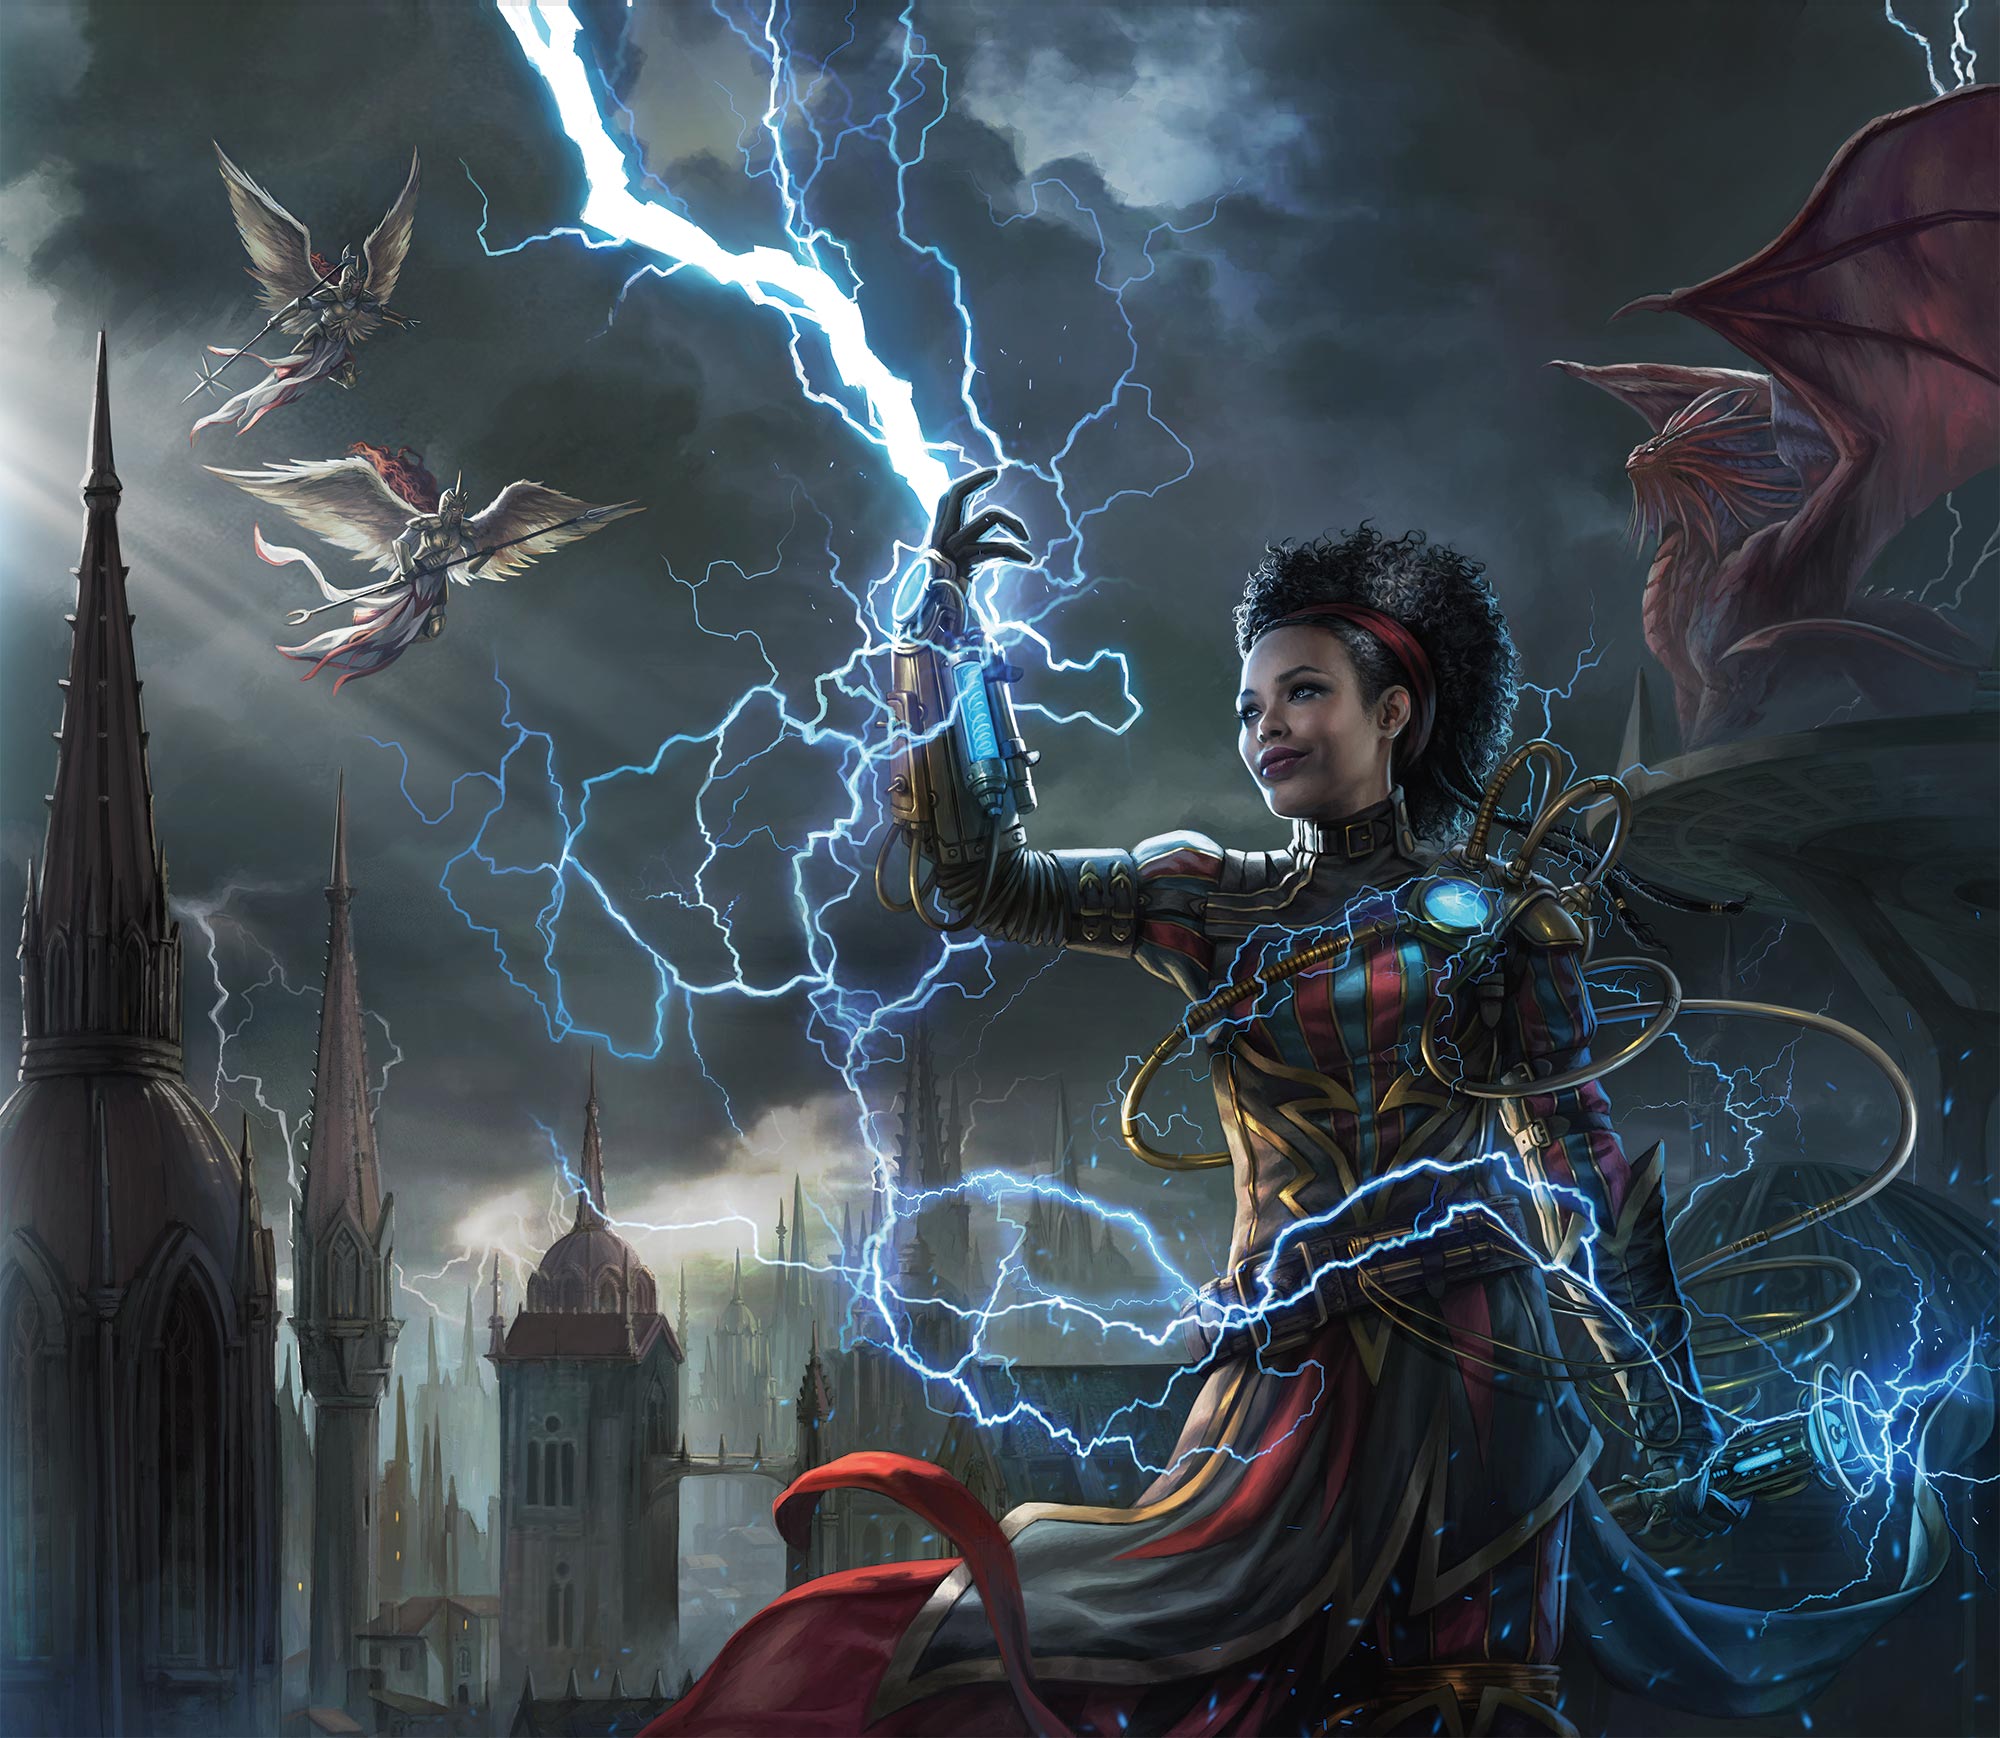 A mage harnesses the power of lightning on Magali Villeneuve's cover to Dungeons & Dragons Guildmasters' Guide to Ravnica (2018) Wizards of the Coast